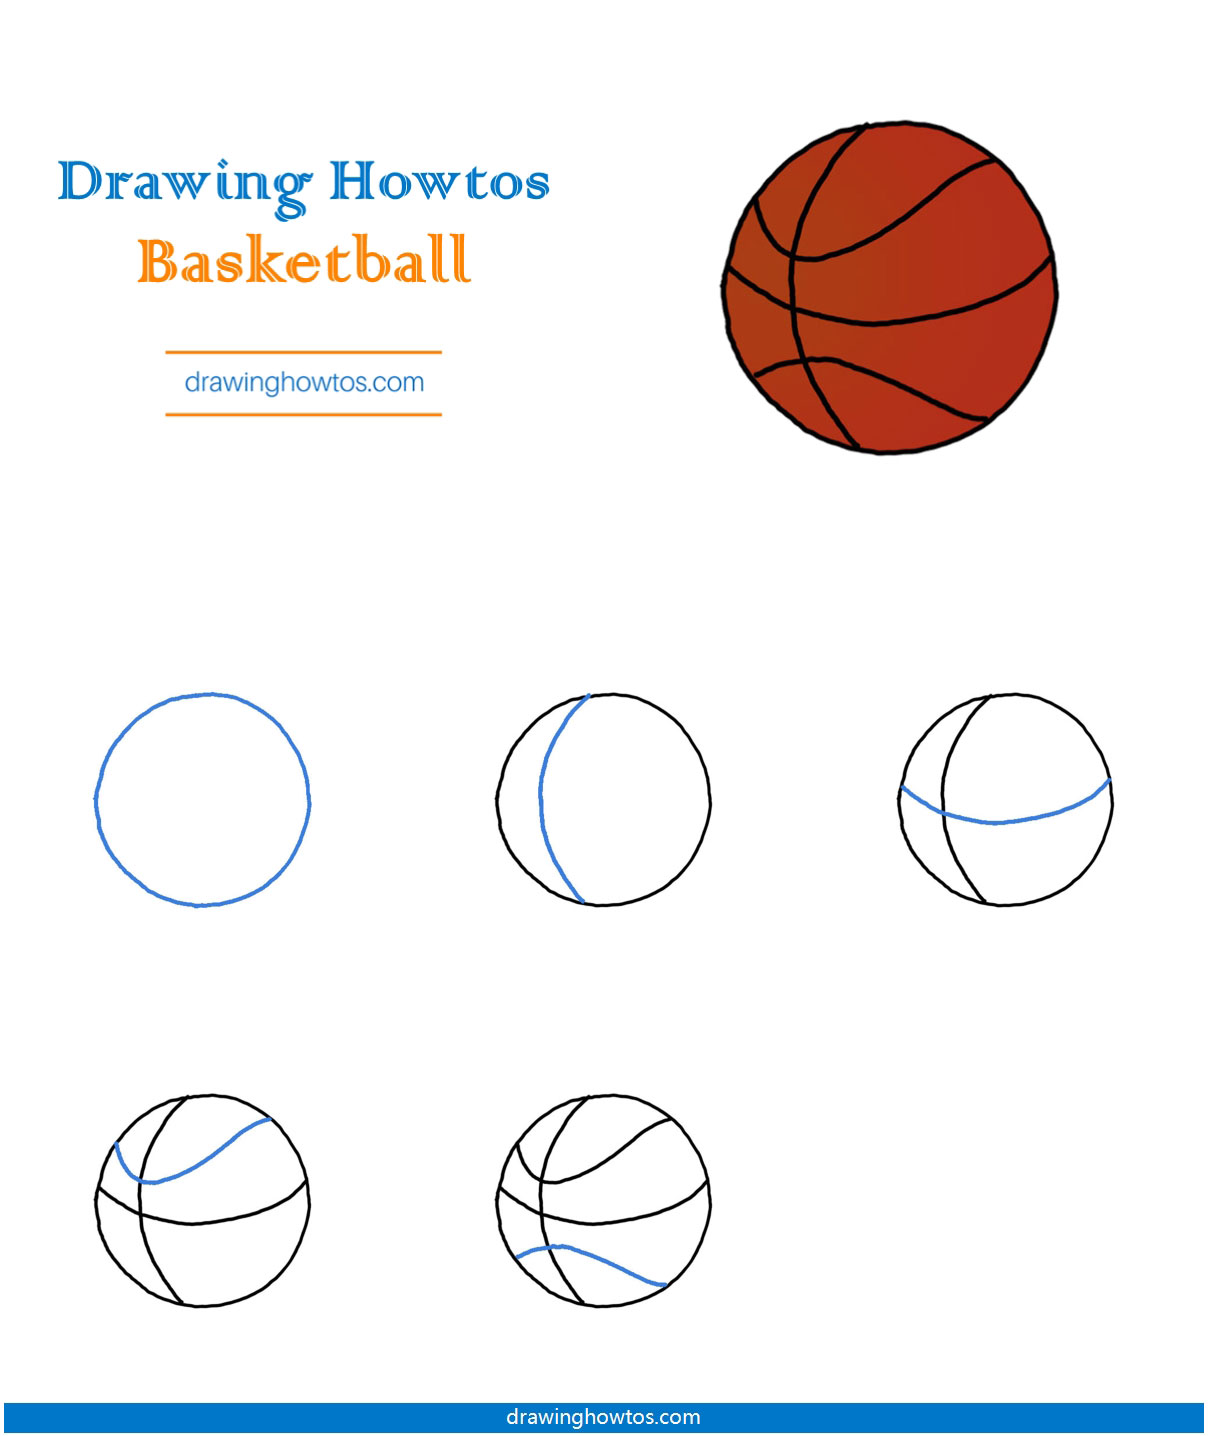 How to Draw a Basketball Step by Step Easy Drawing Guides Drawing